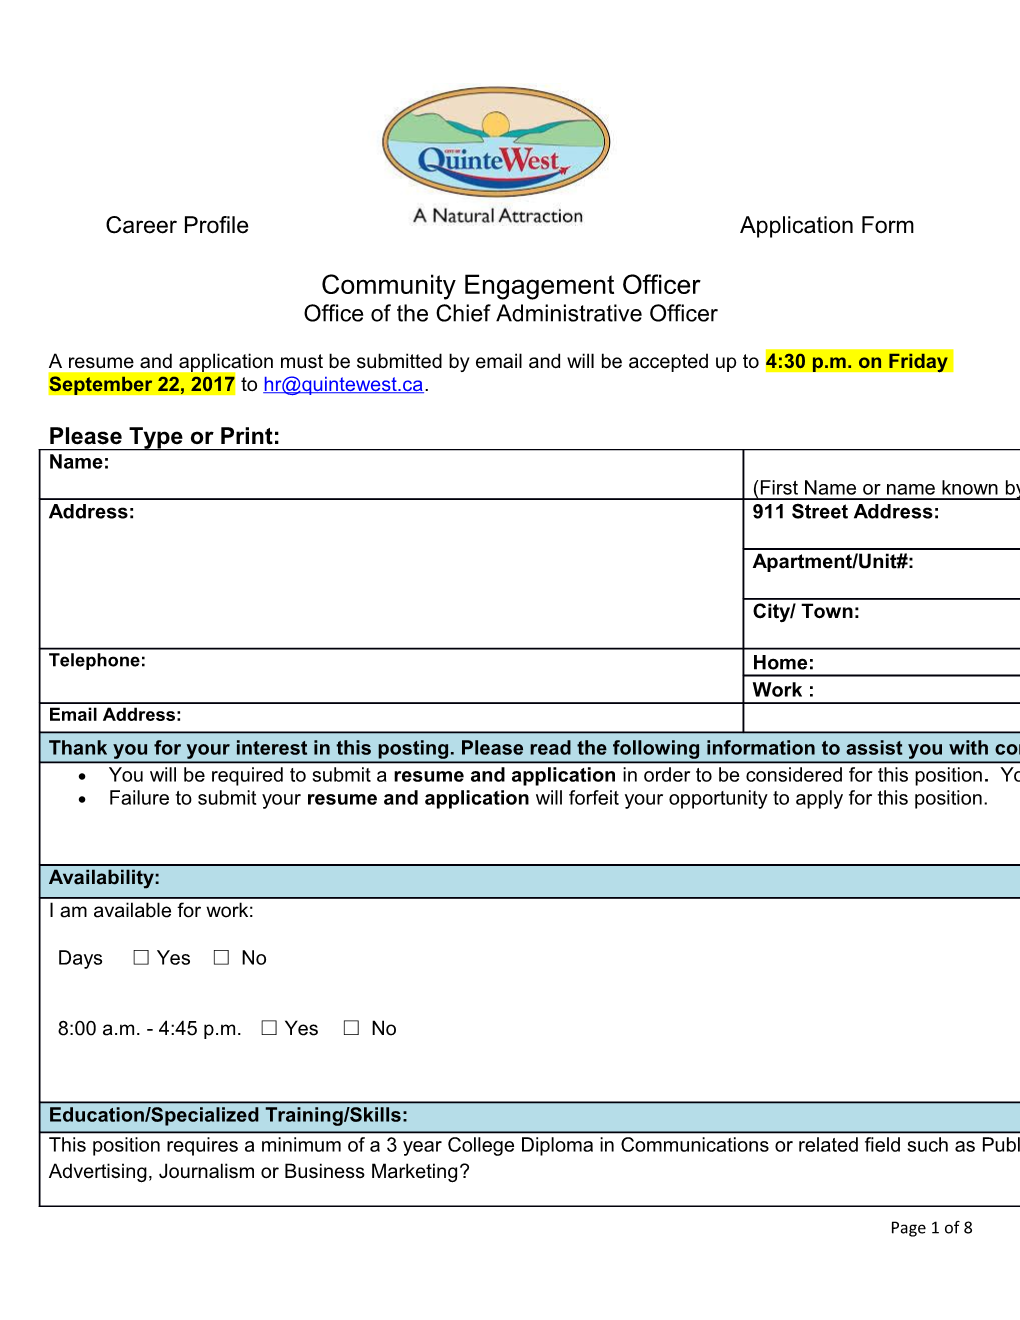 Career Profile Application Form s1